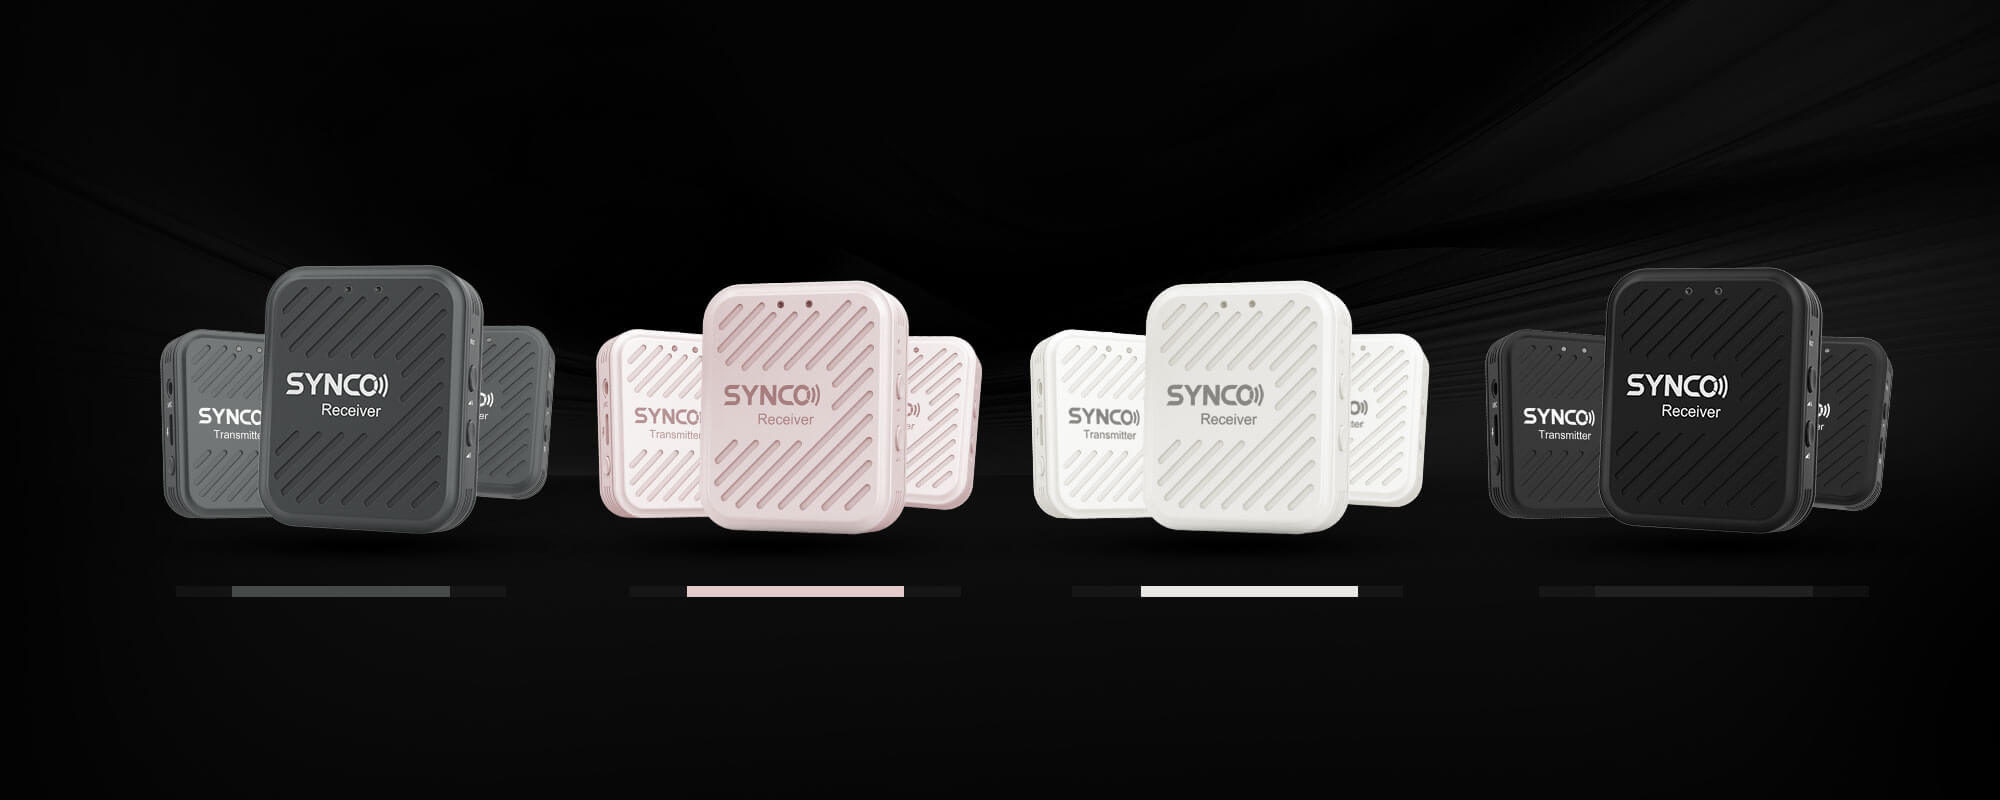 Synco G1-A2 White Digital Wireless Microphone System TX+TX+RX for